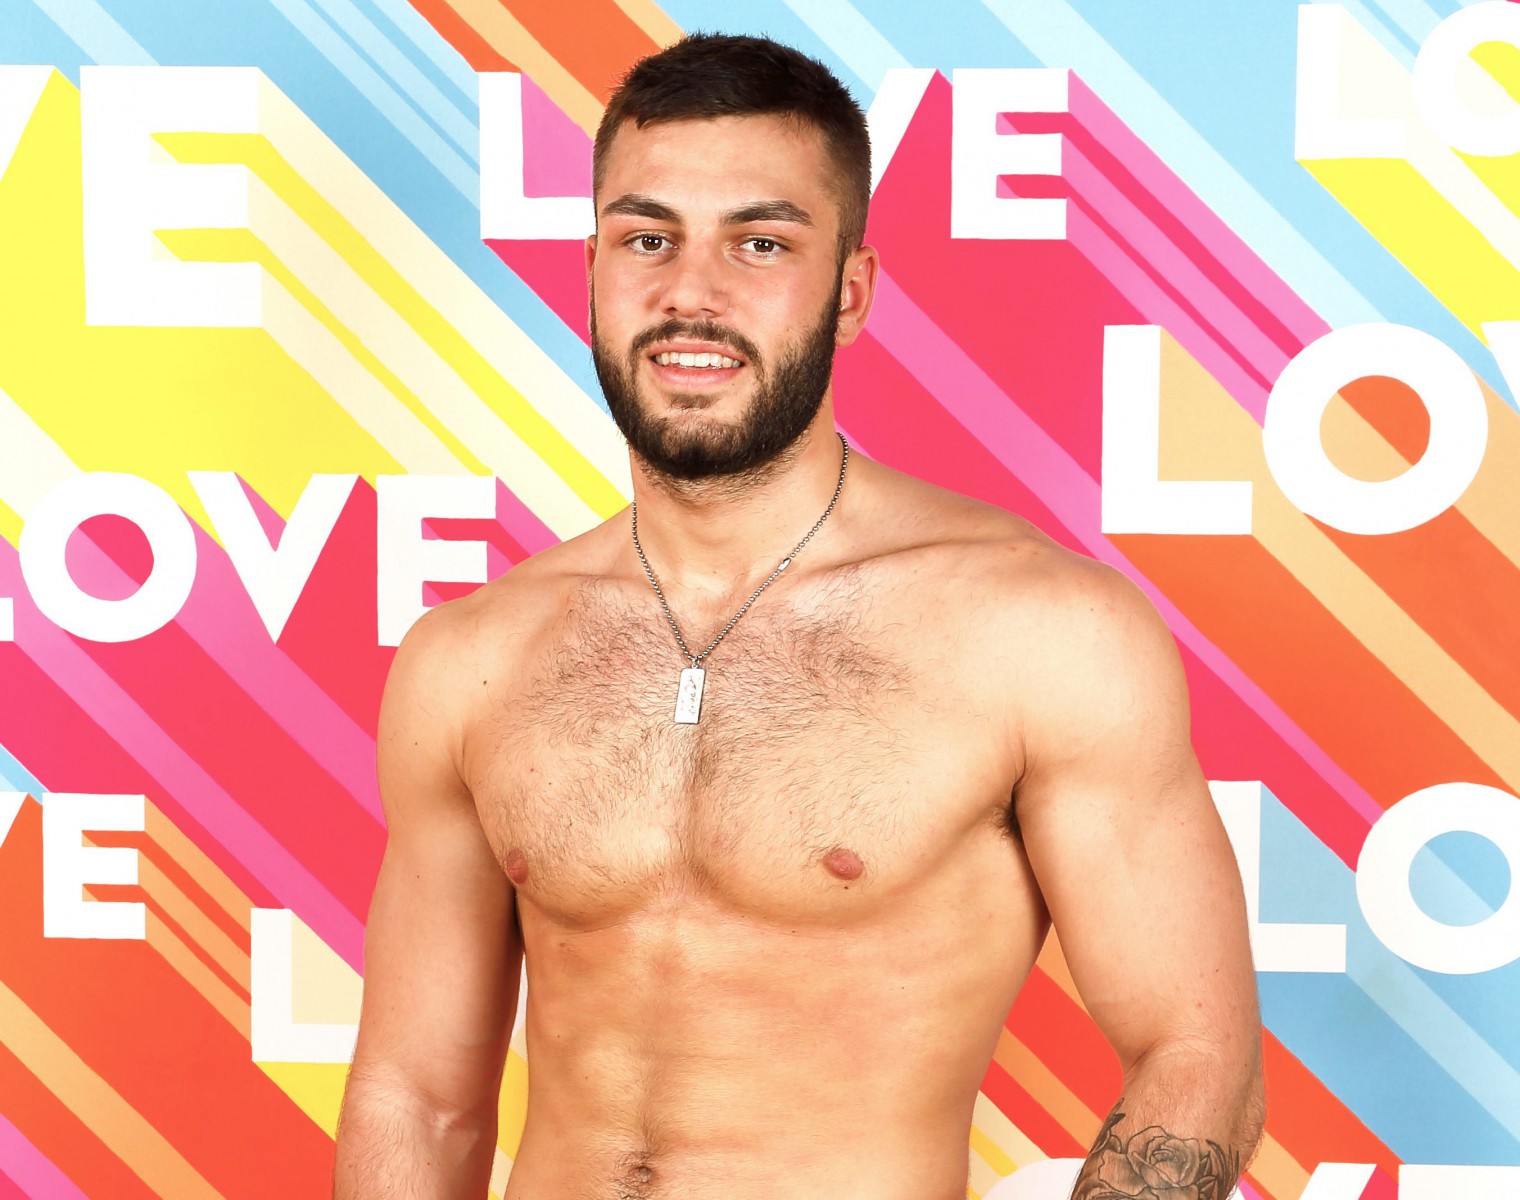 Finley is looking to find the girl of his dreams on Love Island